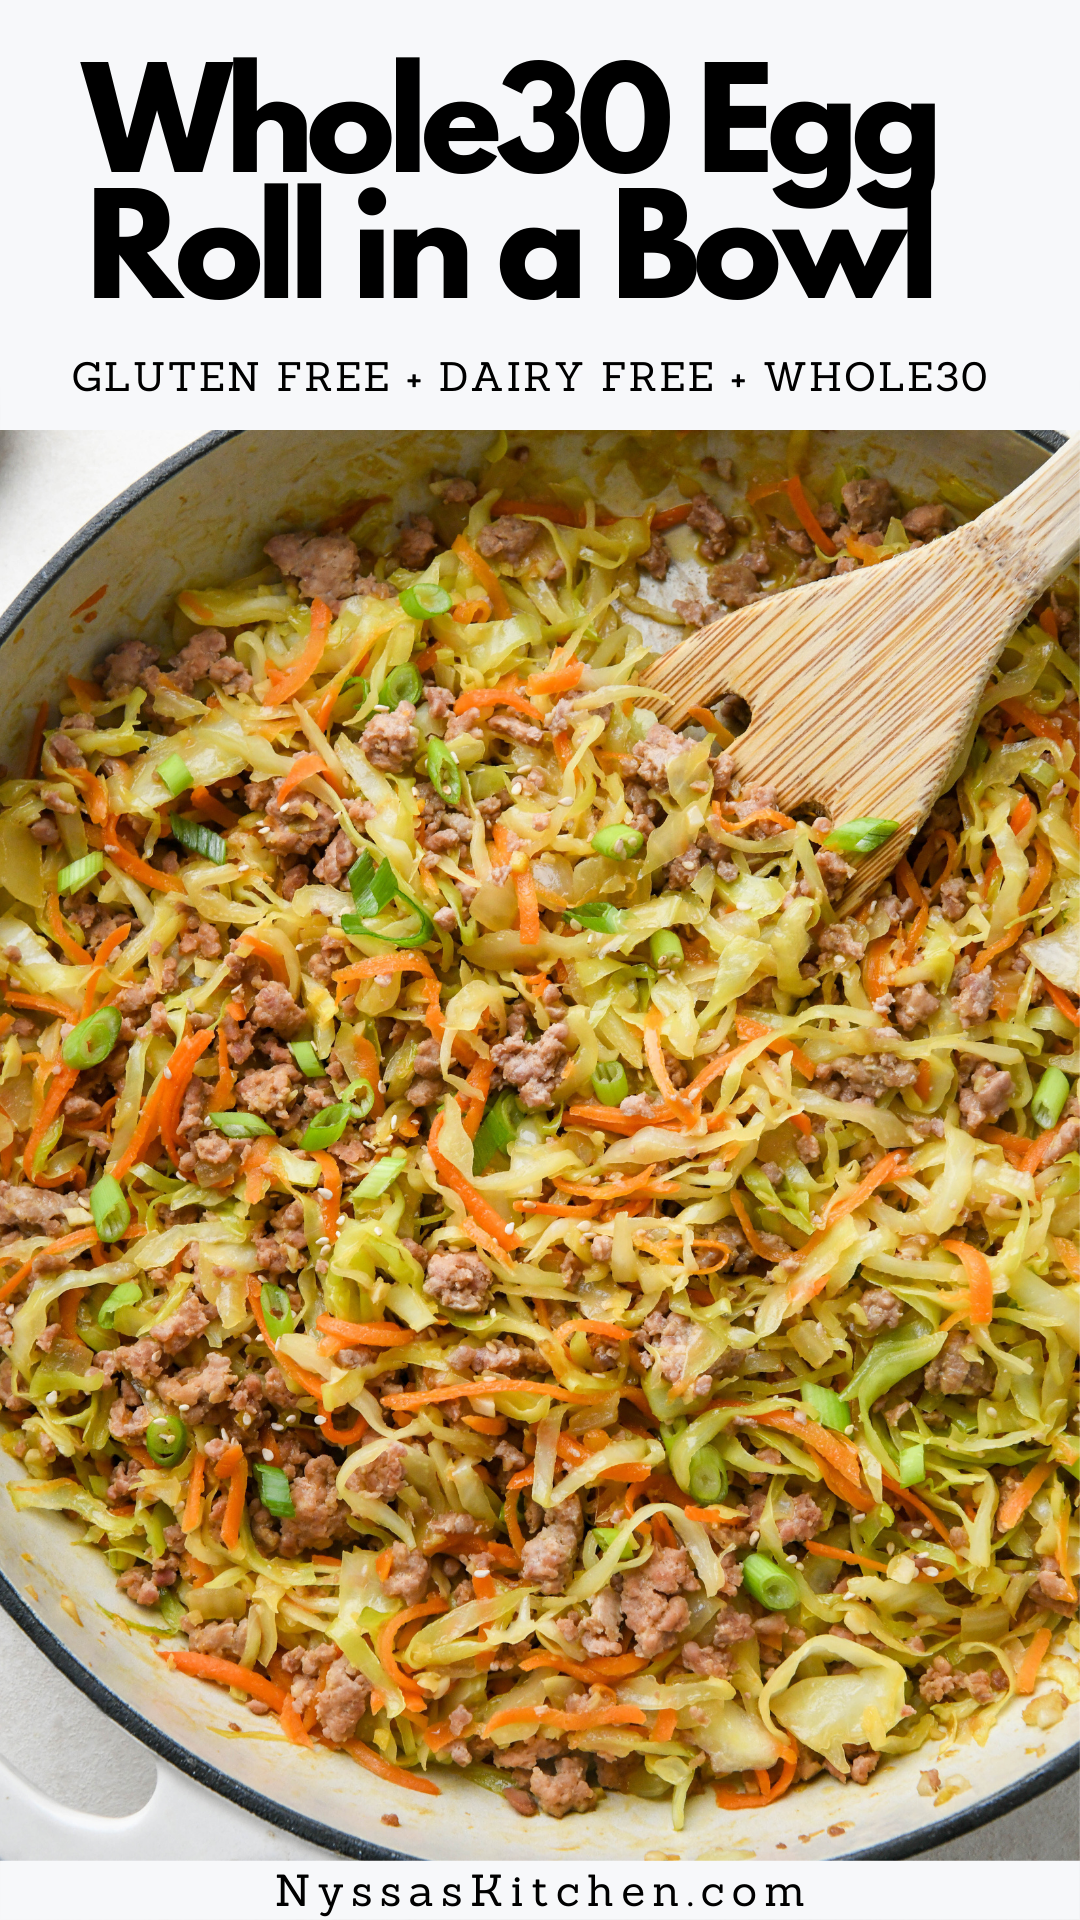 This healthy egg roll in a bowl is made in one skillet with simple ingredients for the perfect weeknight dinner recipe! Made with ground turkey, shredded cabbage, carrots, a savory sauce, and some irresistible garnishes. Easy to throw together and totally delicious! Whole30, gluten free, paleo.